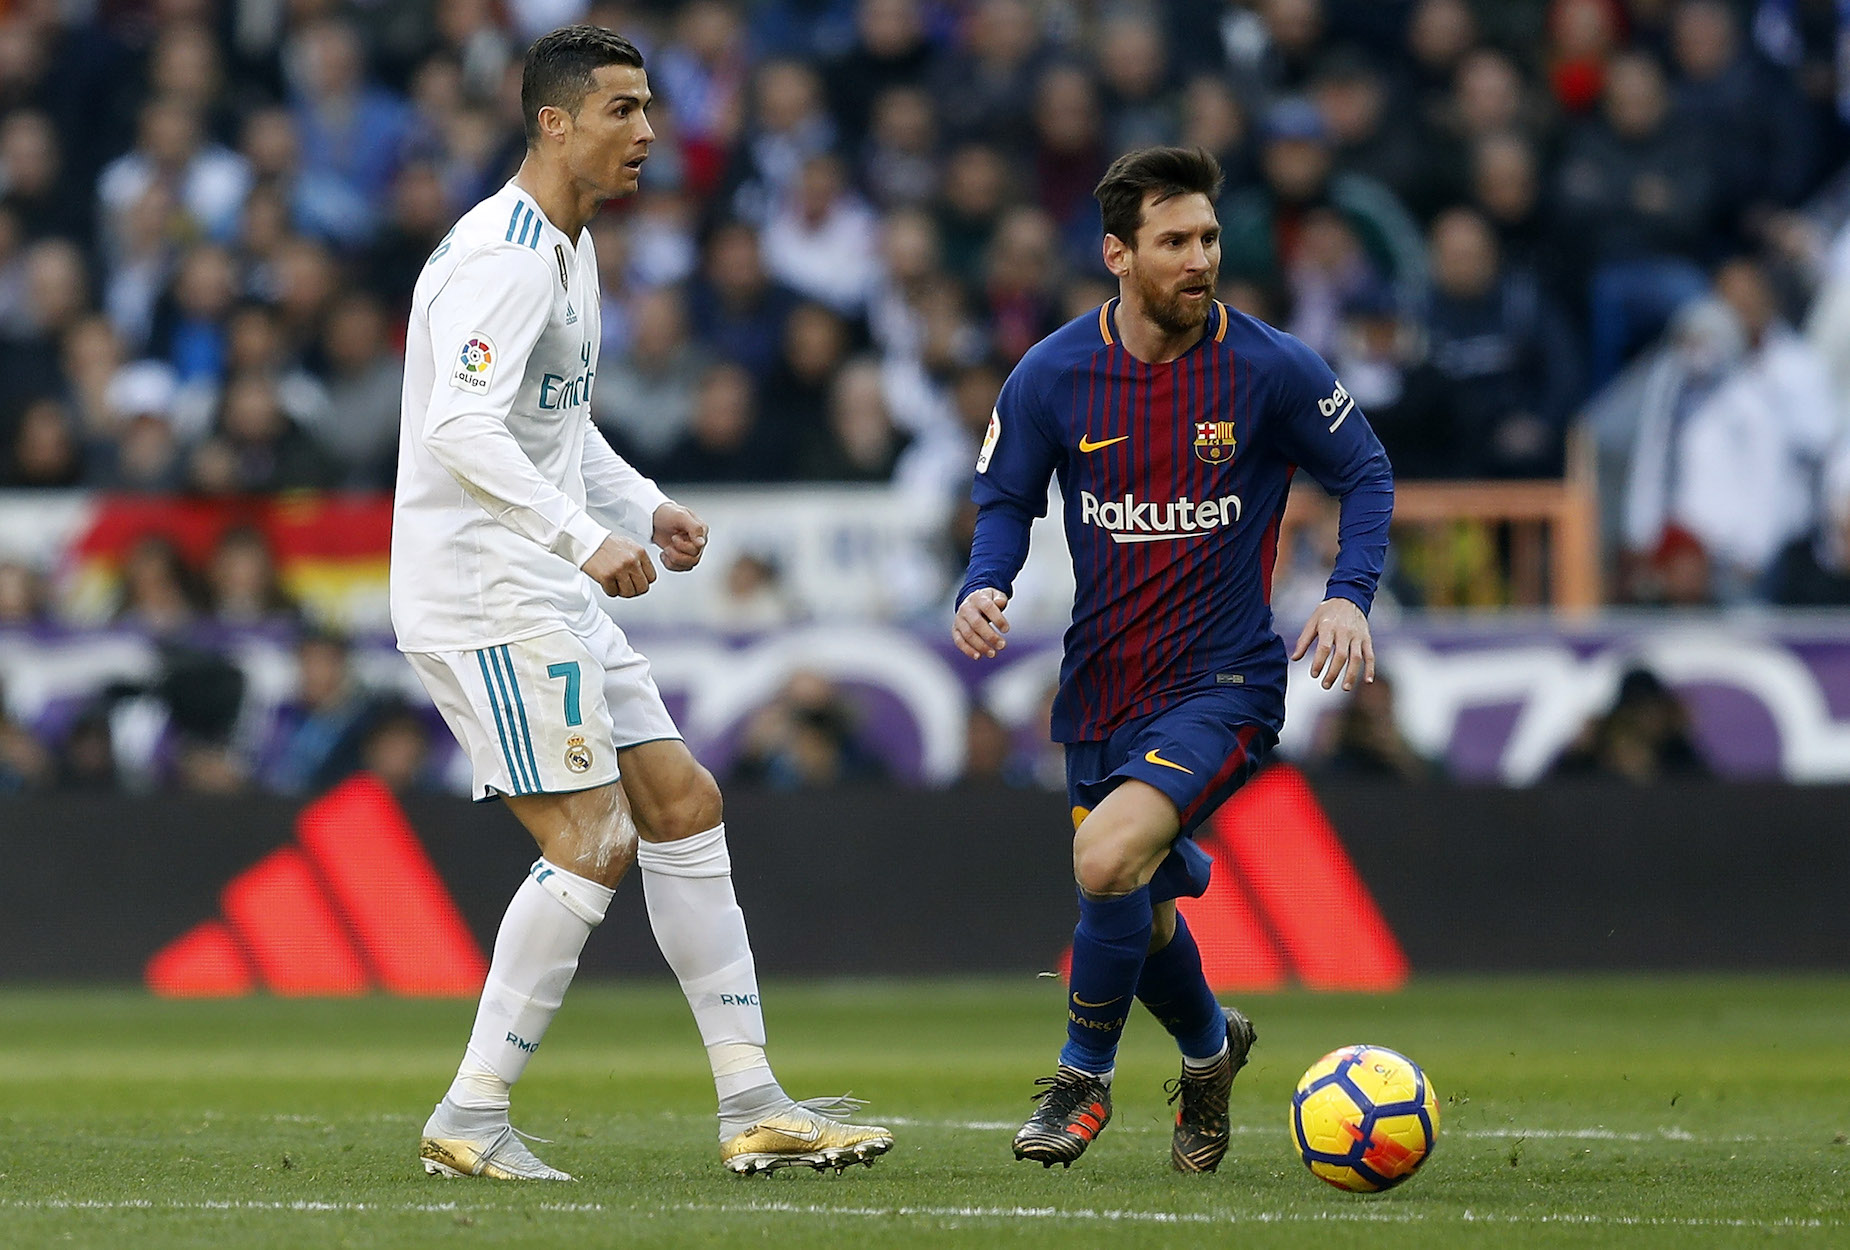 Messi has 'beautiful' rivalry with Ronaldo, The Canberra Times